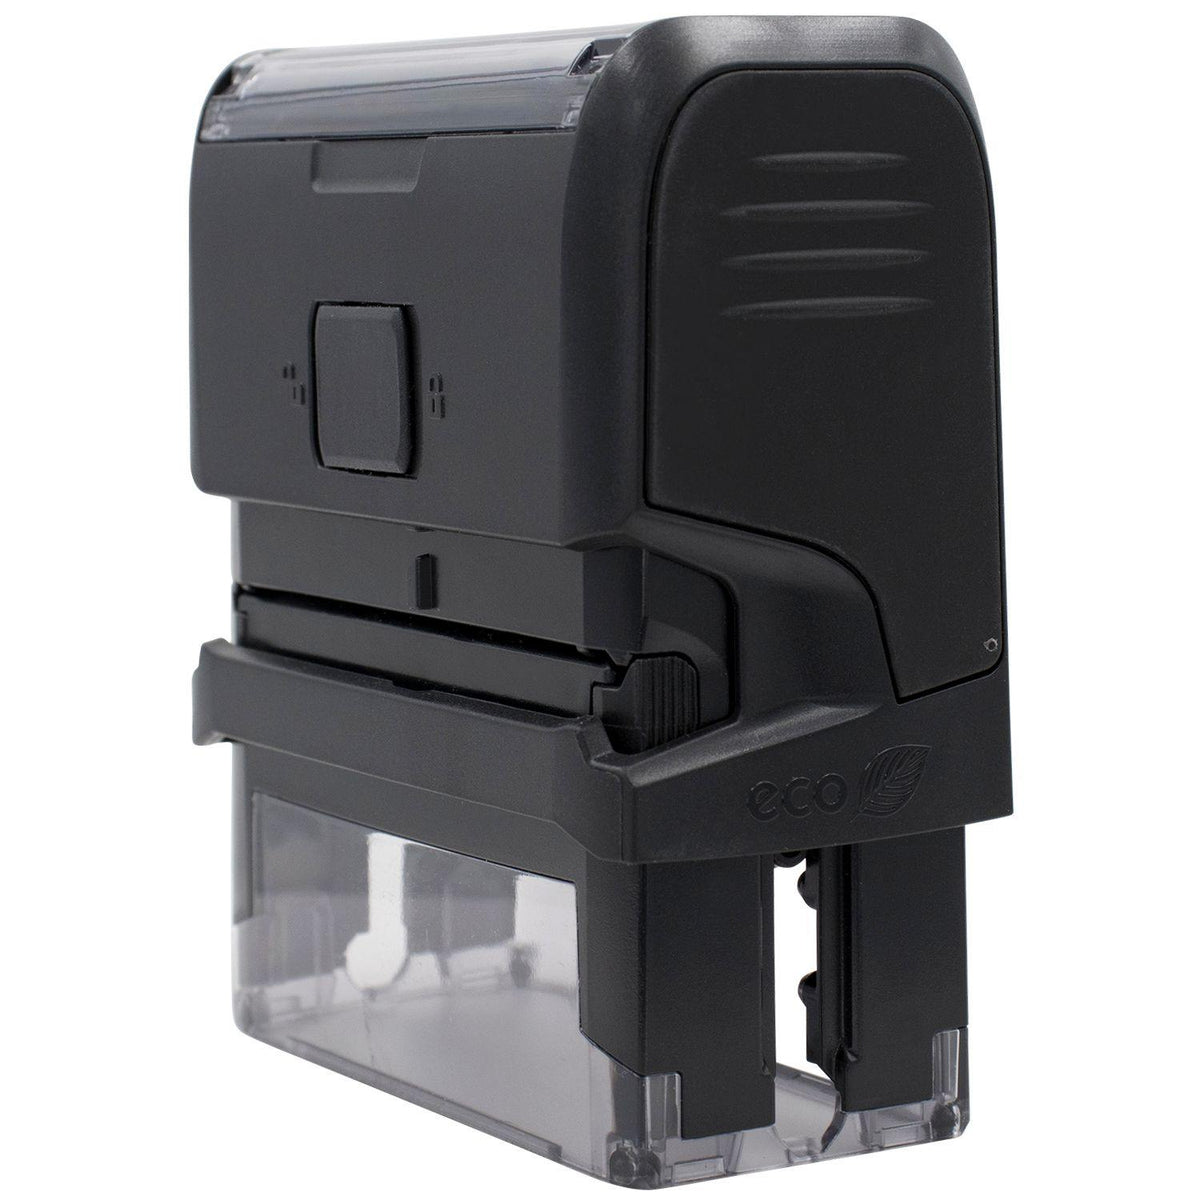 Self Inking Two Line Faxed Stamp - Engineer Seal Stamps - Brand_Trodat, Impression Size_Small, Stamp Type_Self-Inking Stamp, Type of Use_Office